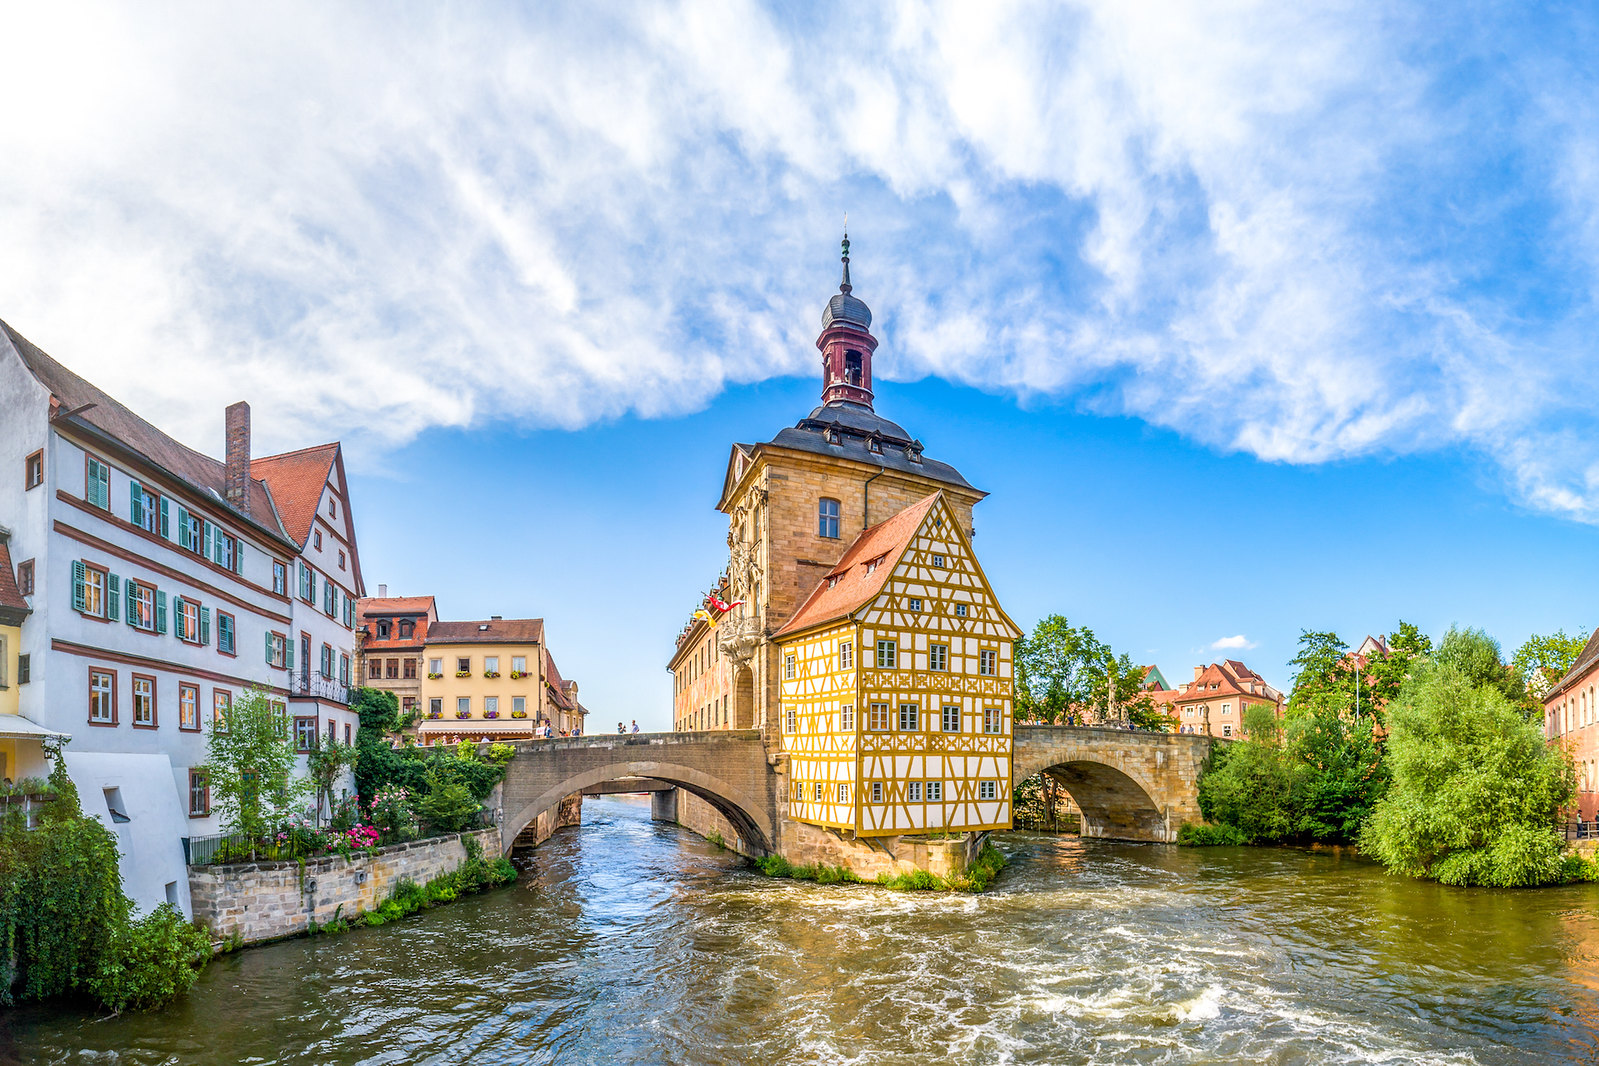 Bamberg - The Most Romantic Honeymoon Destinations in Germany (planforgermany.com)